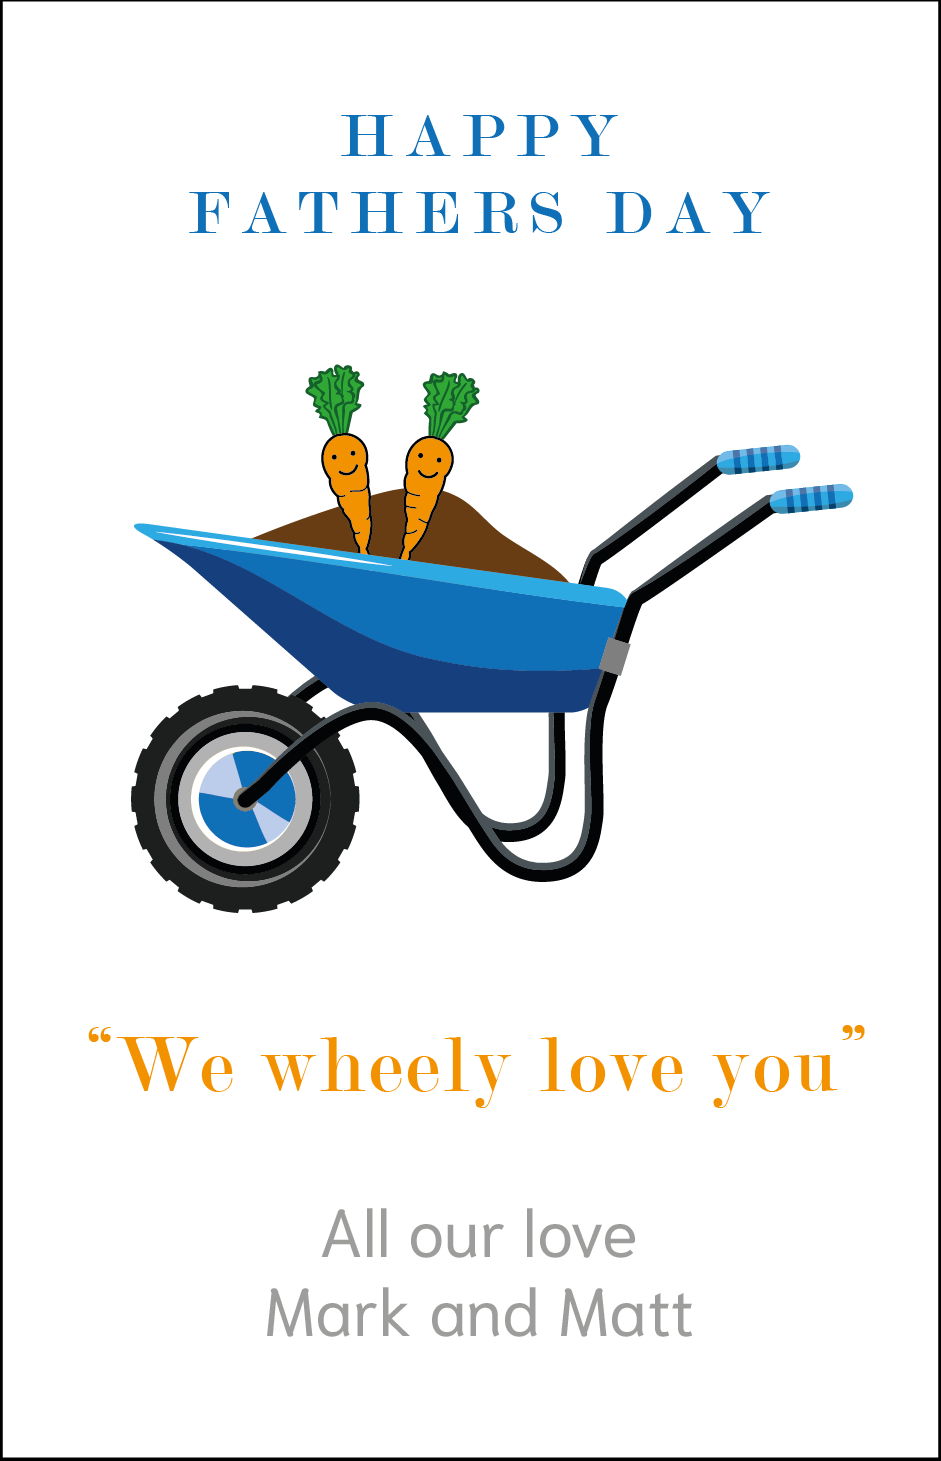 Personalised Fathers Day Card - Wheely Love You